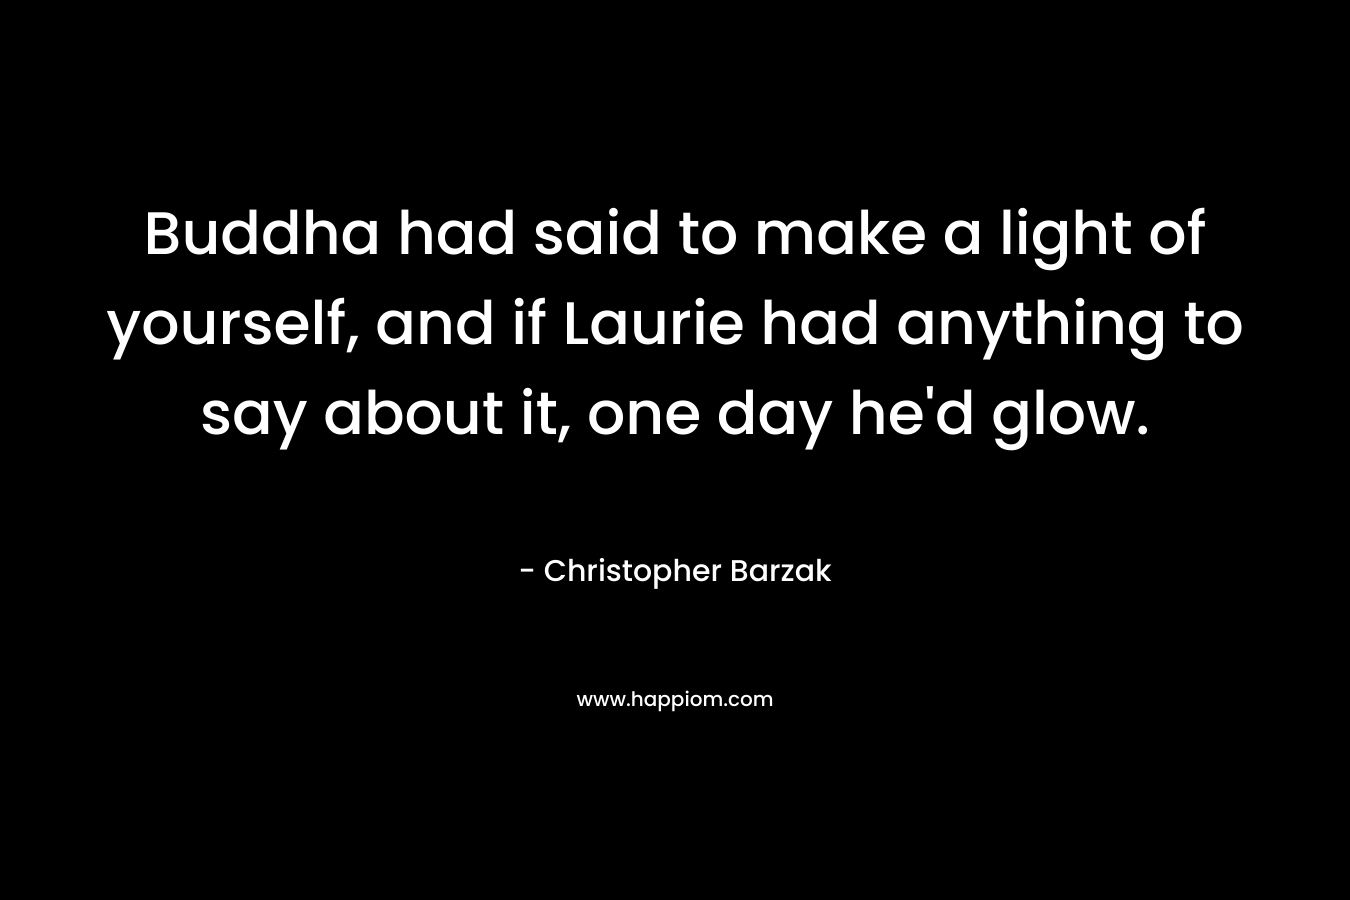 Buddha had said to make a light of yourself, and if Laurie had anything to say about it, one day he'd glow.